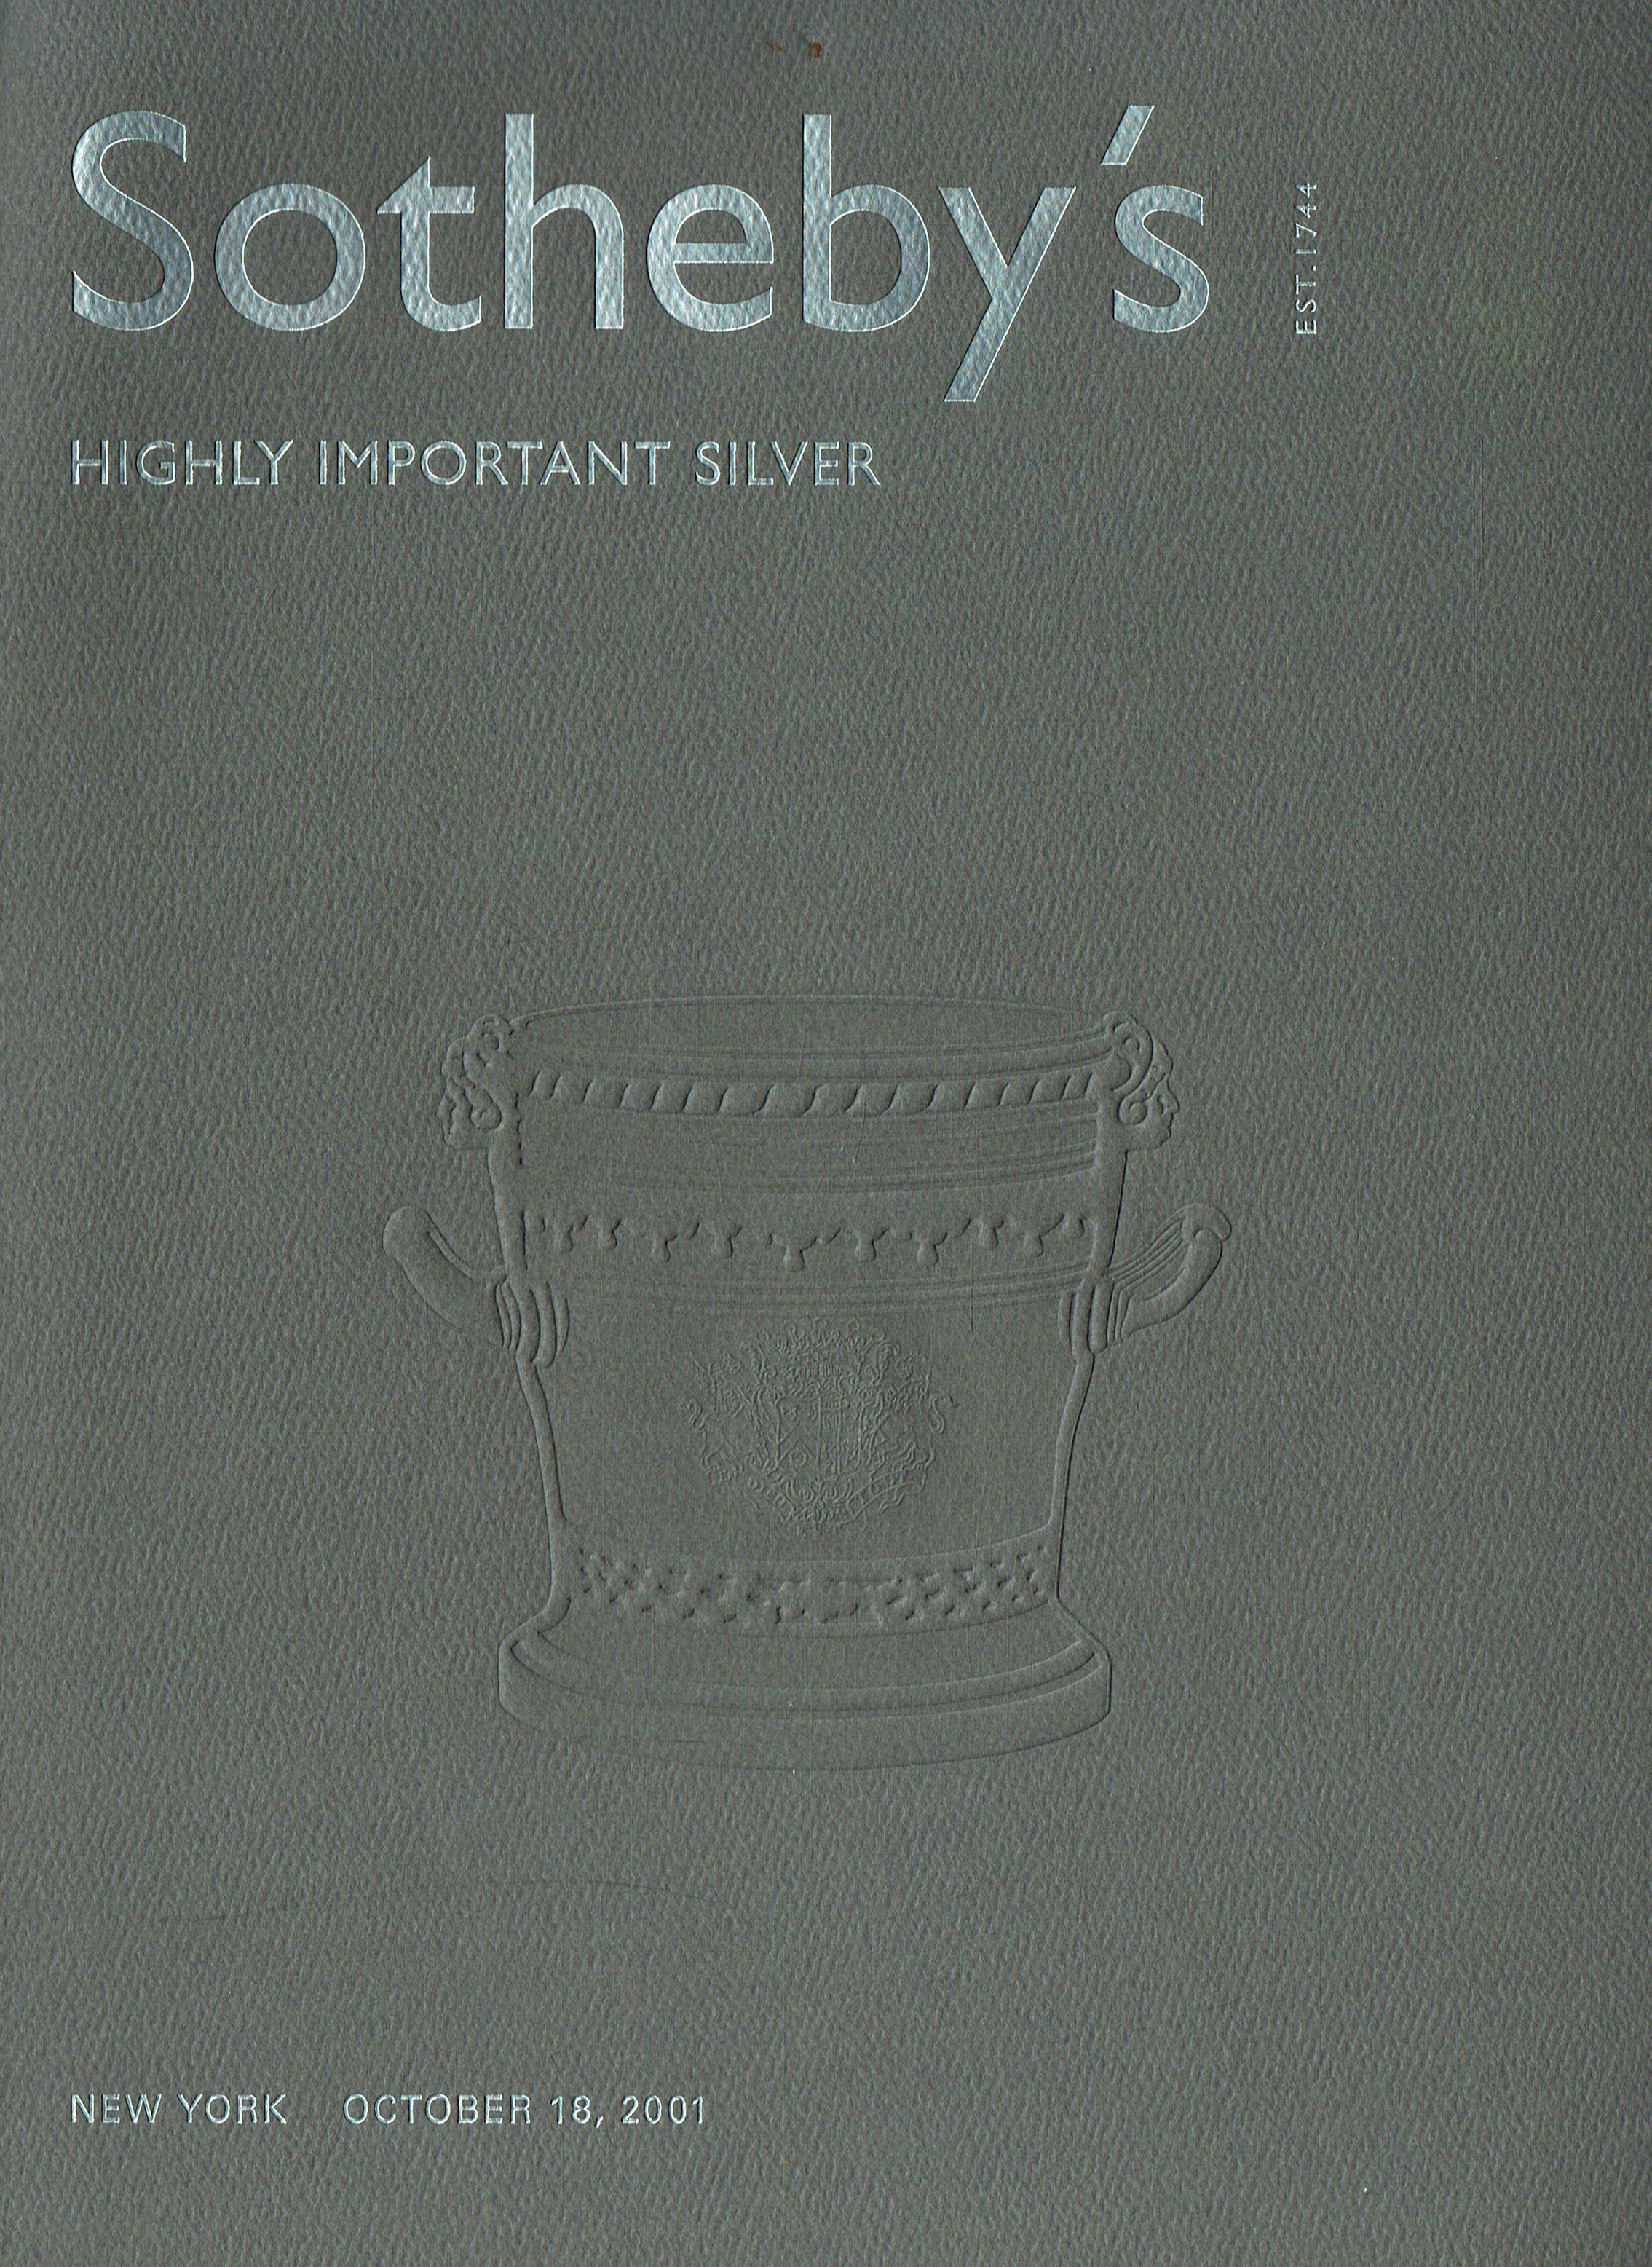 Sothebys October 2001 Highly Important Silver (Digitial Only)